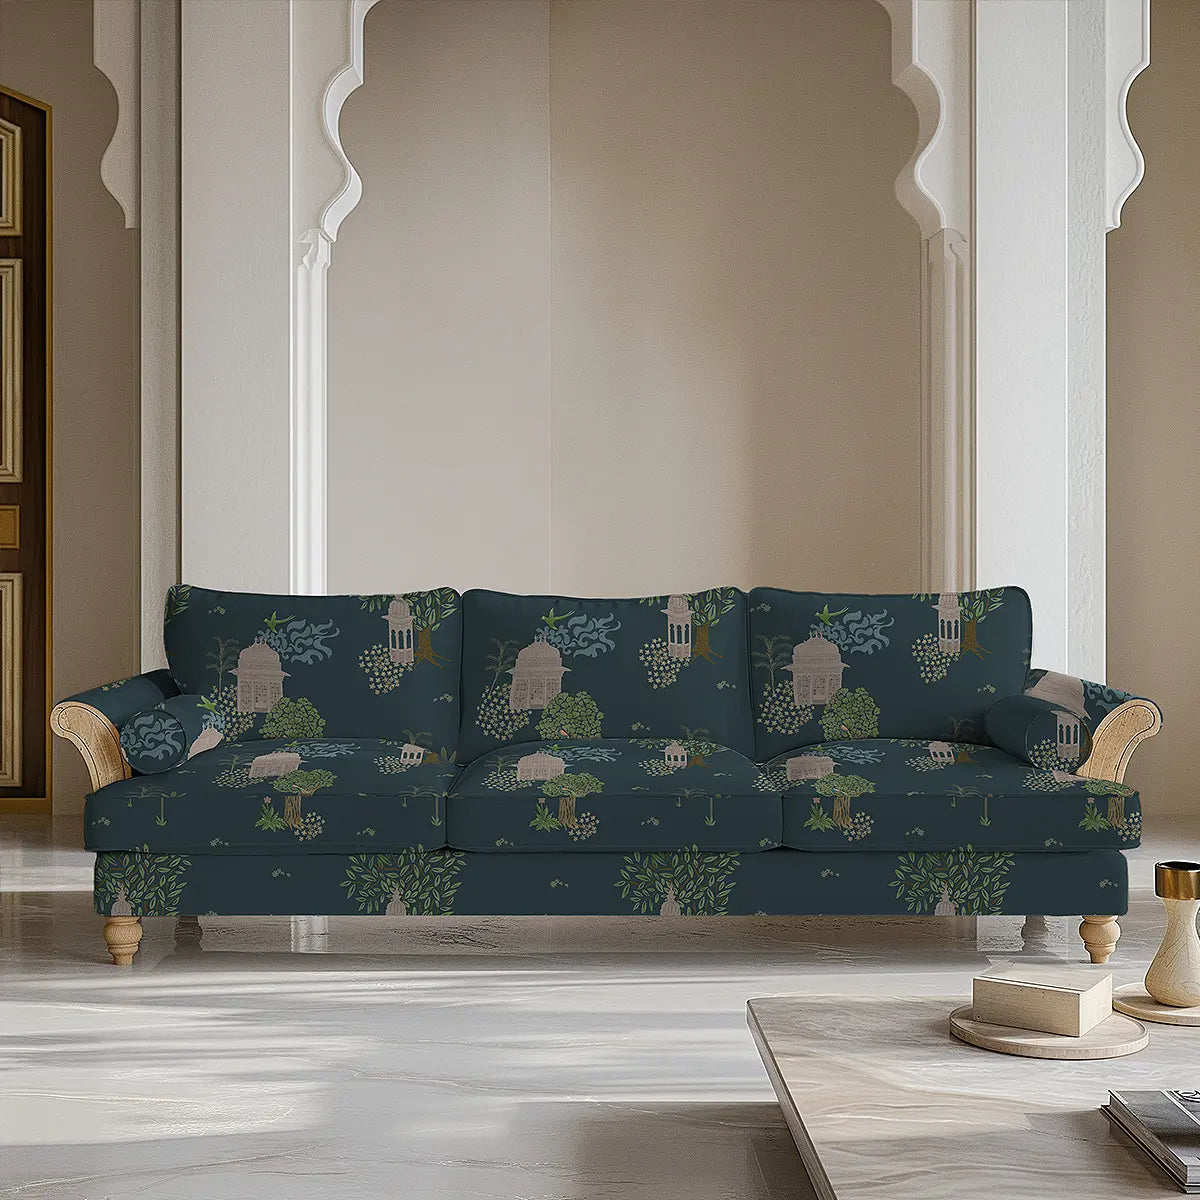 Buy now, Ananda Indian Theme Sofa and Chair Upholstery Fabric in Blue, fort